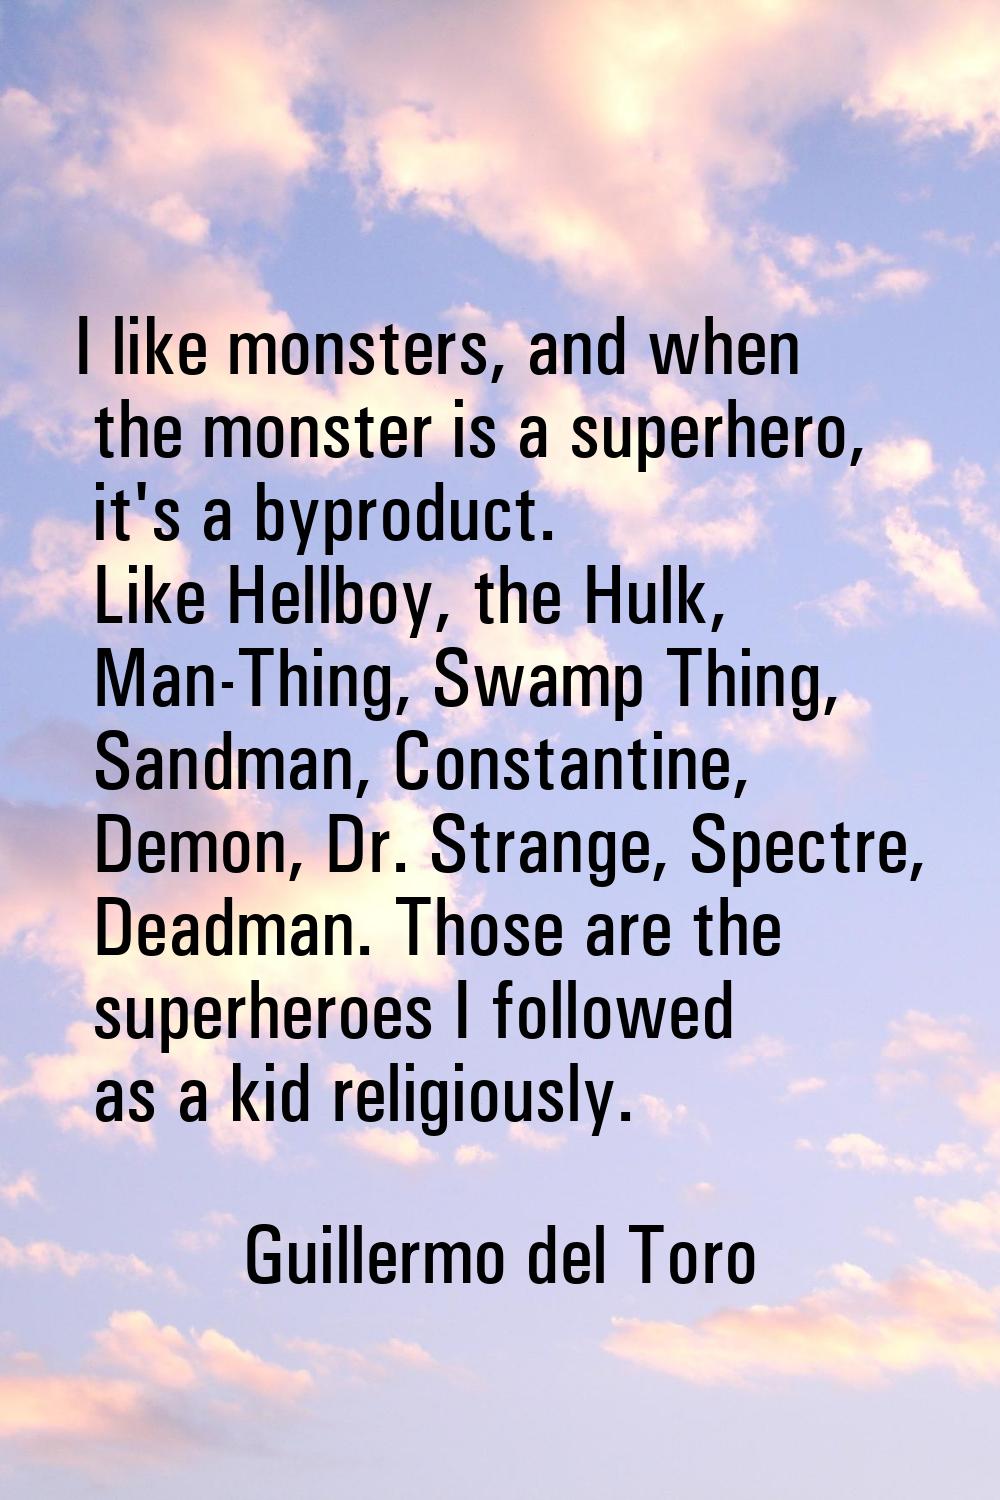 I like monsters, and when the monster is a superhero, it's a byproduct. Like Hellboy, the Hulk, Man